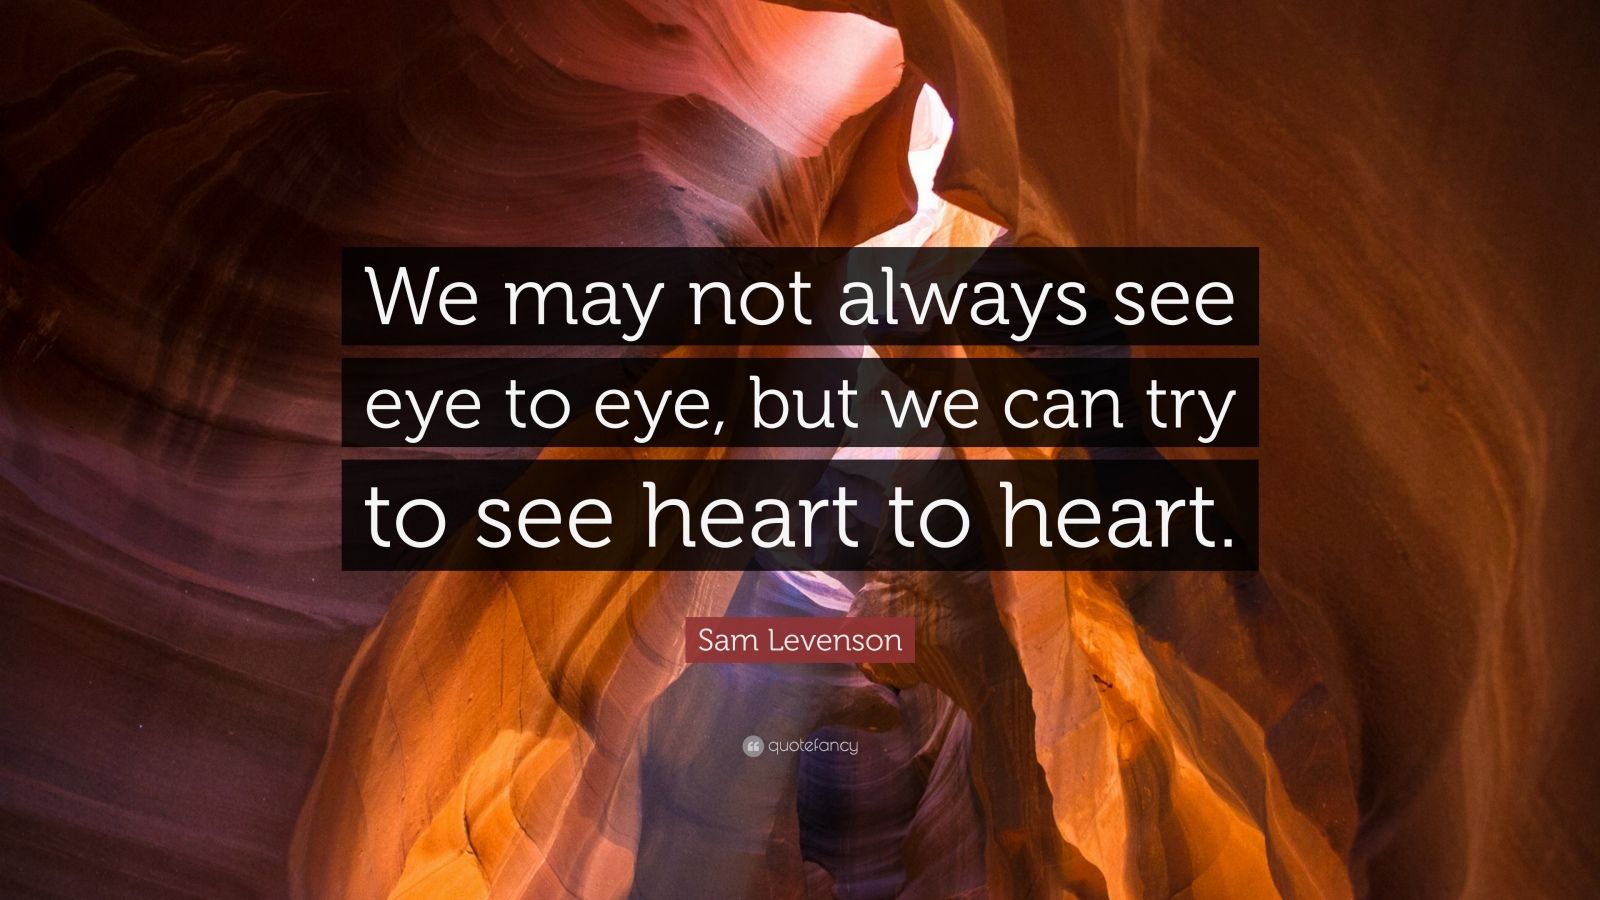 Sam Levenson Quote: “We may not always see eye to eye, but we can